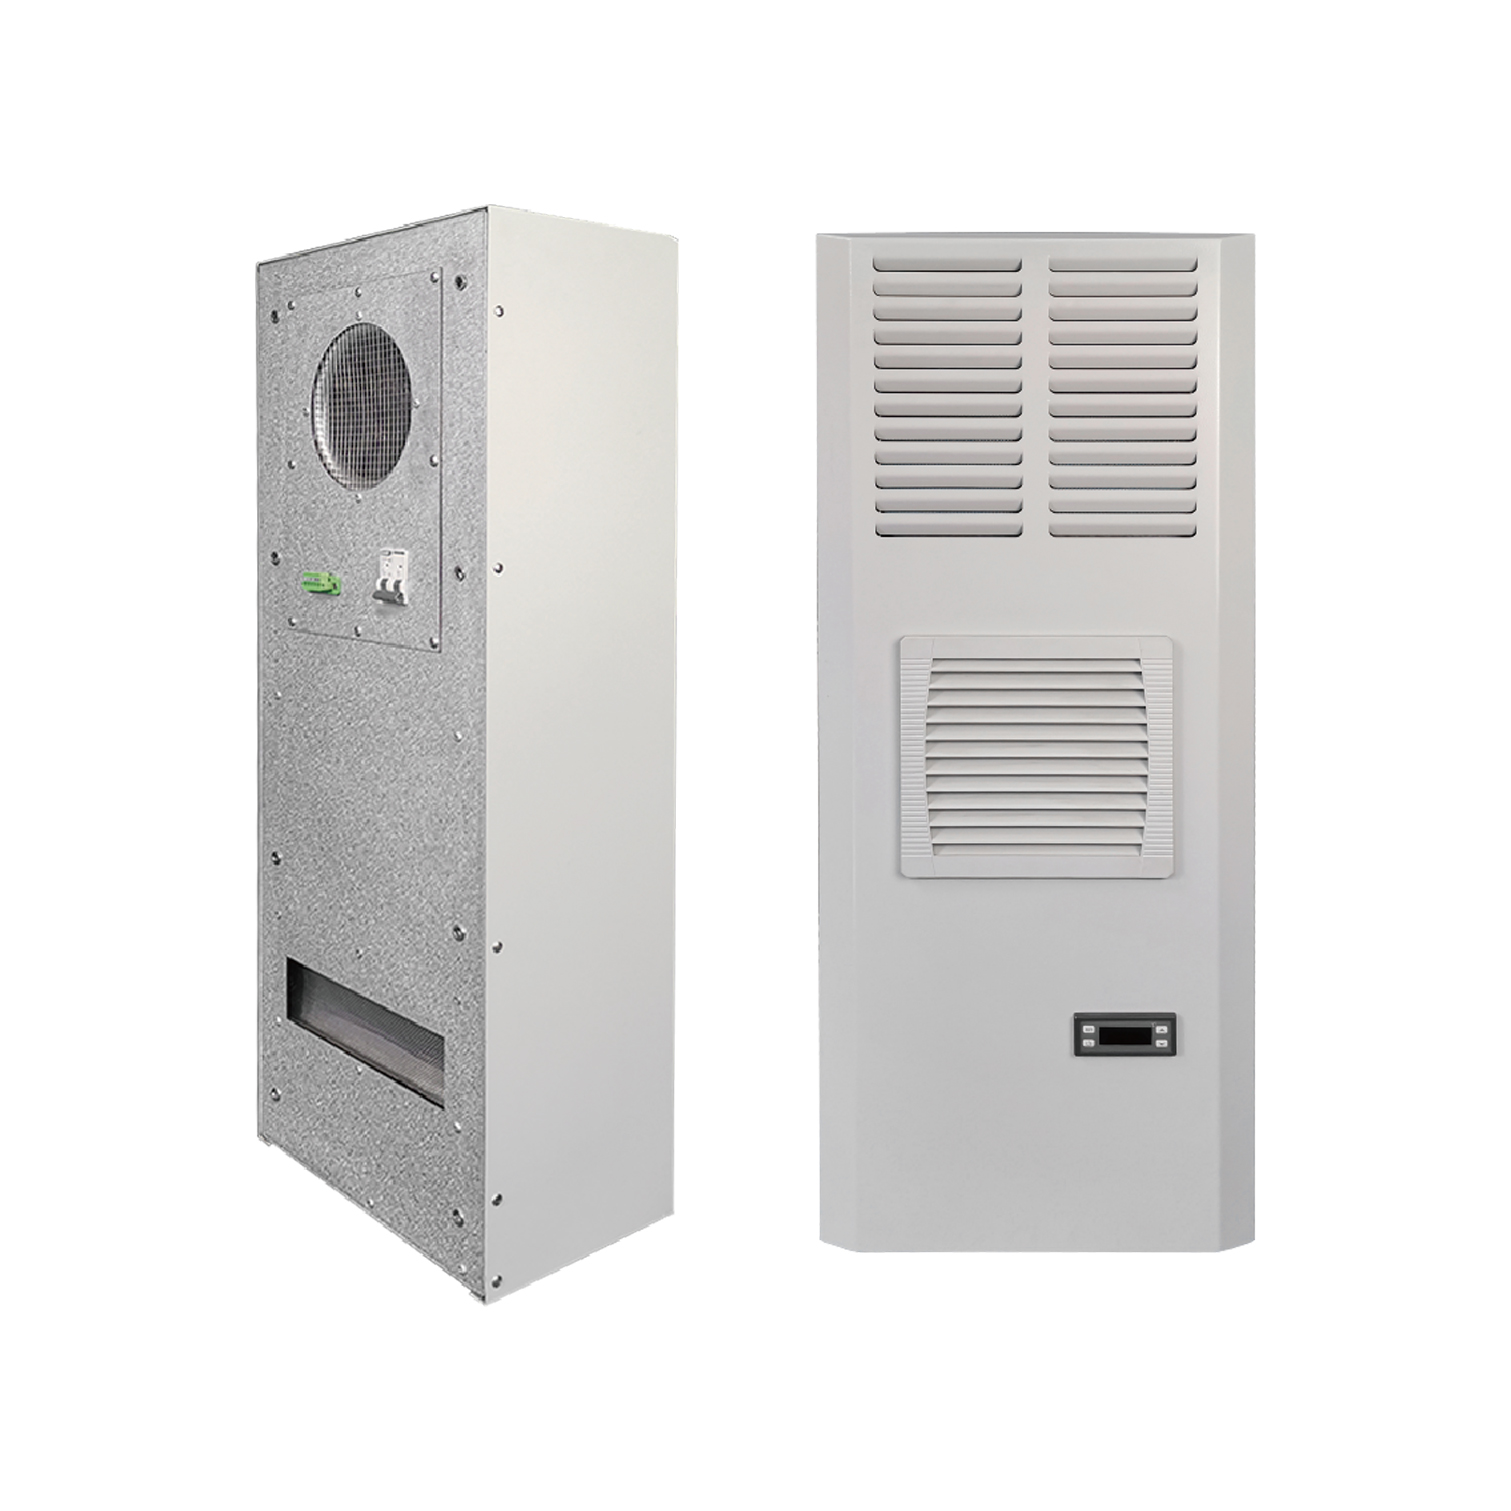 PW6-A Smart series cabinet air conditioner